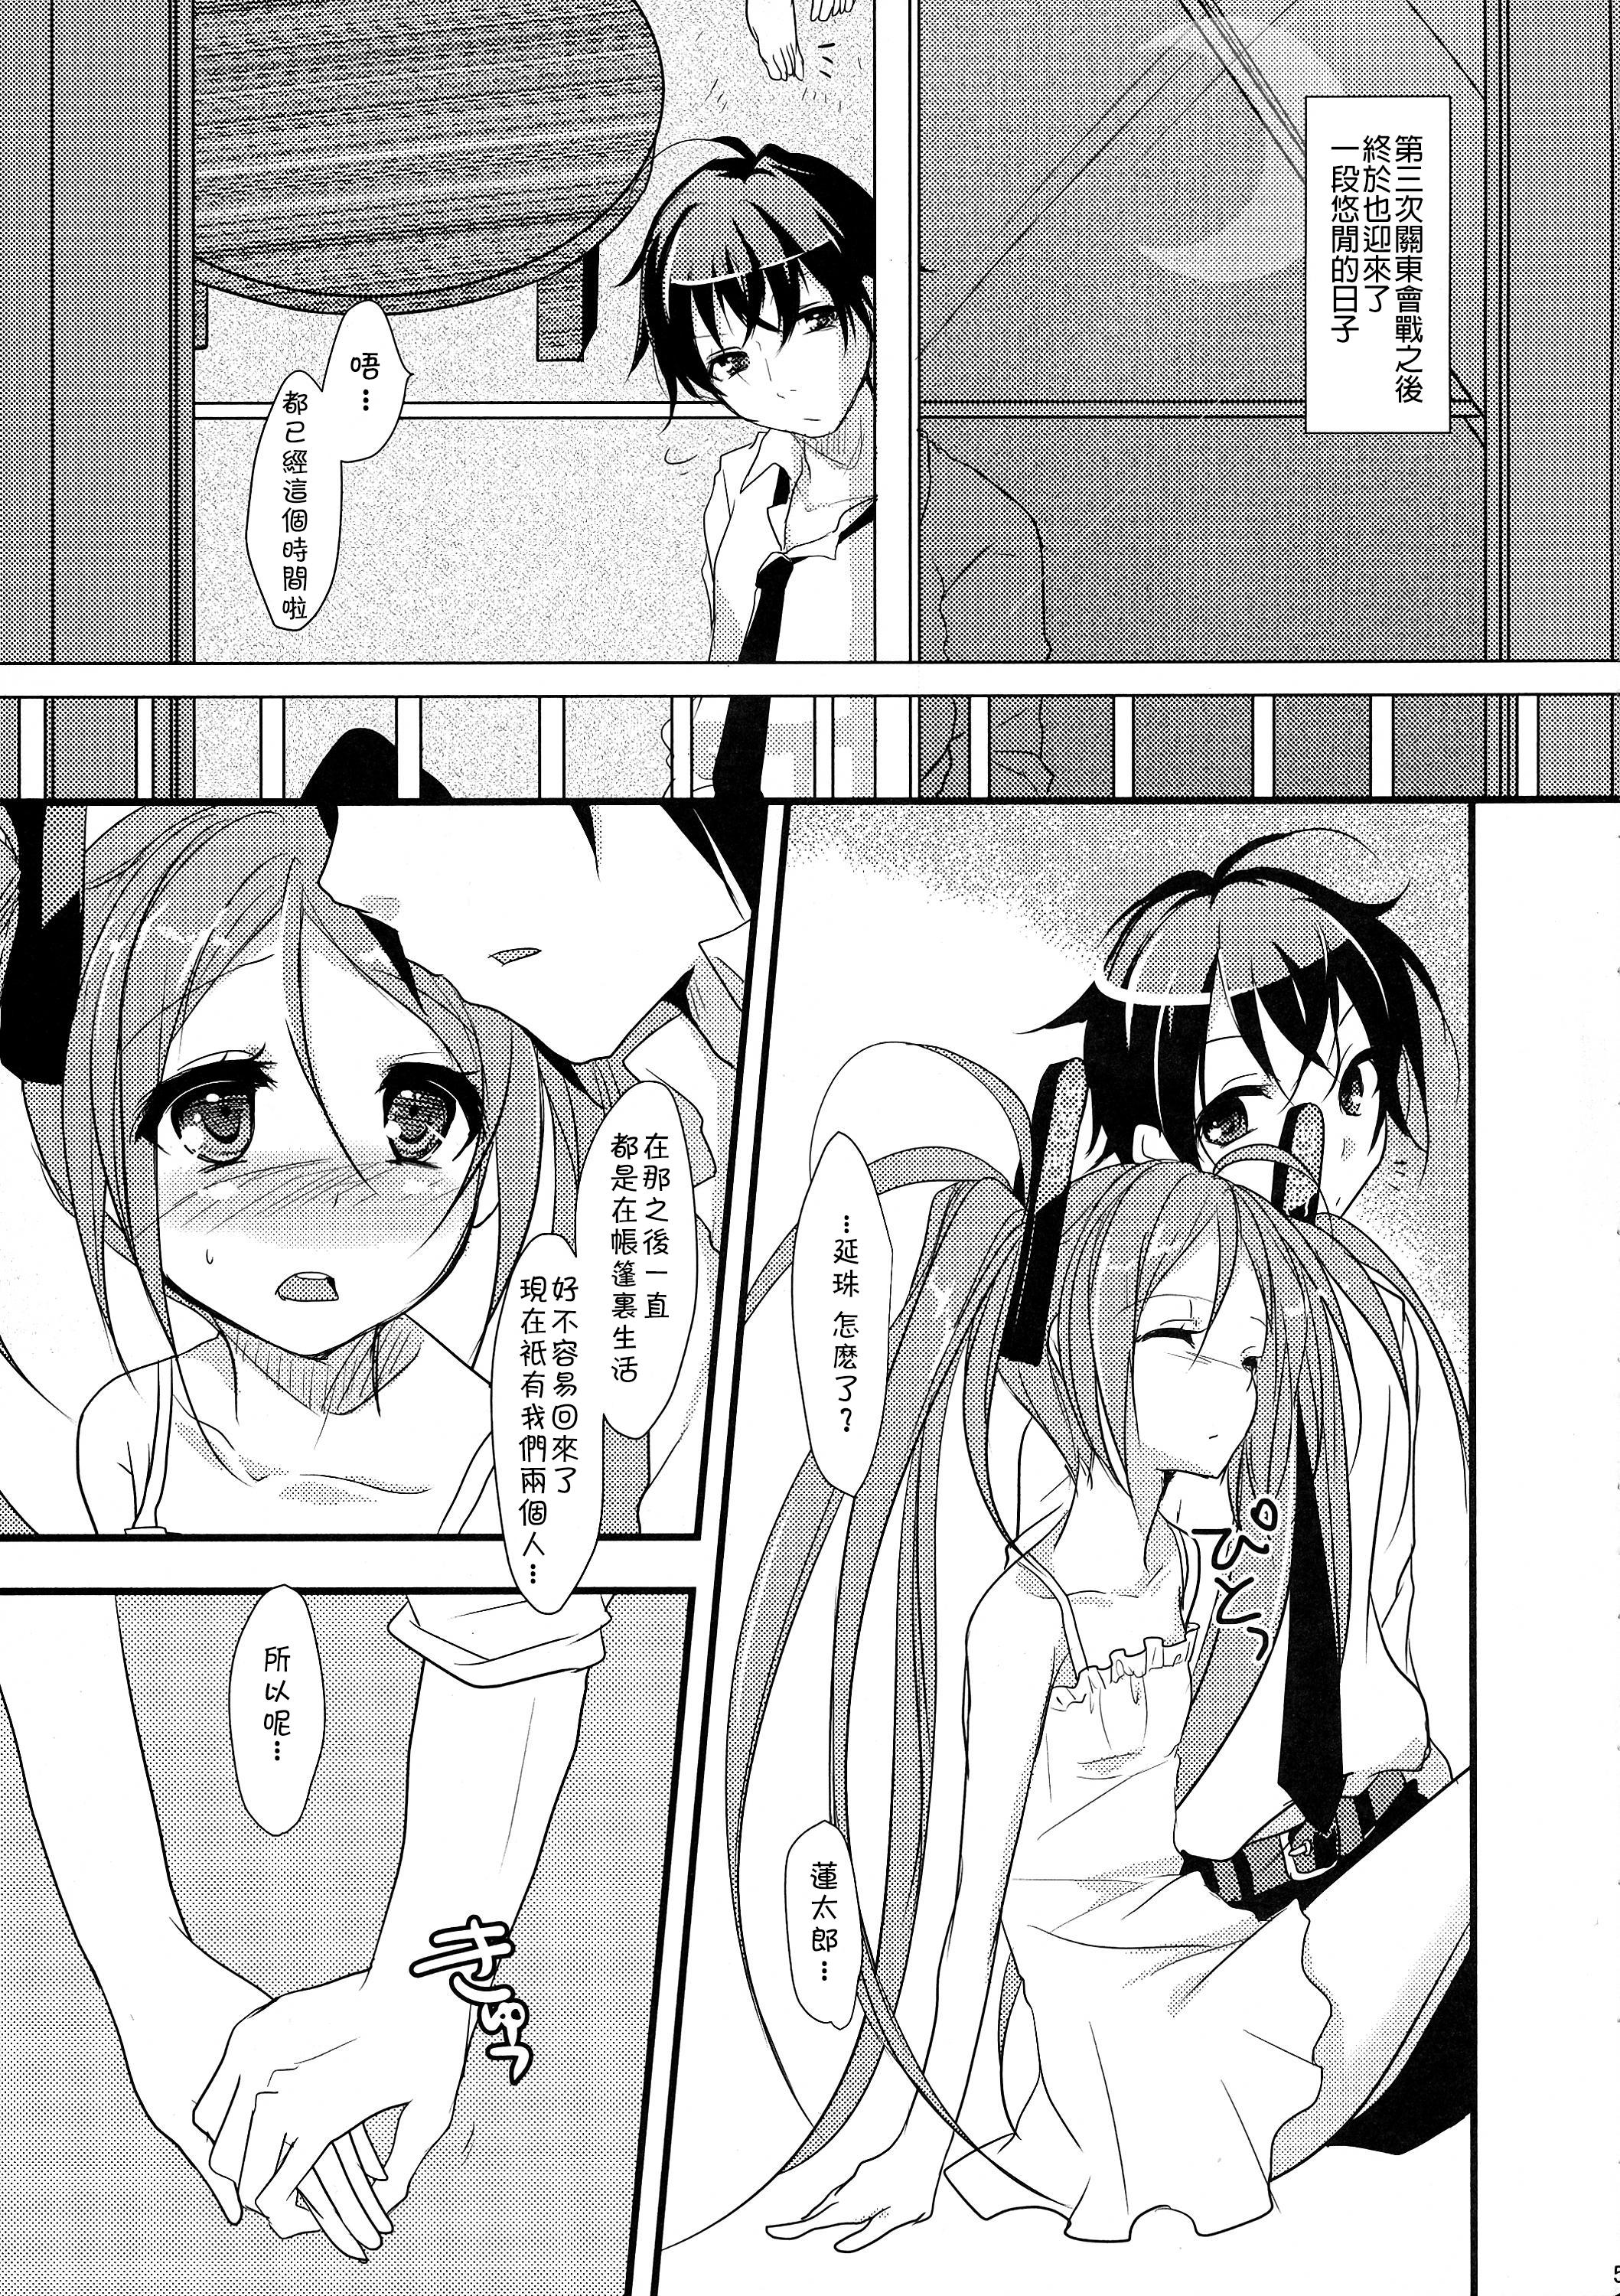 Outside little rabbit 2 - Black bullet Squirting - Page 7